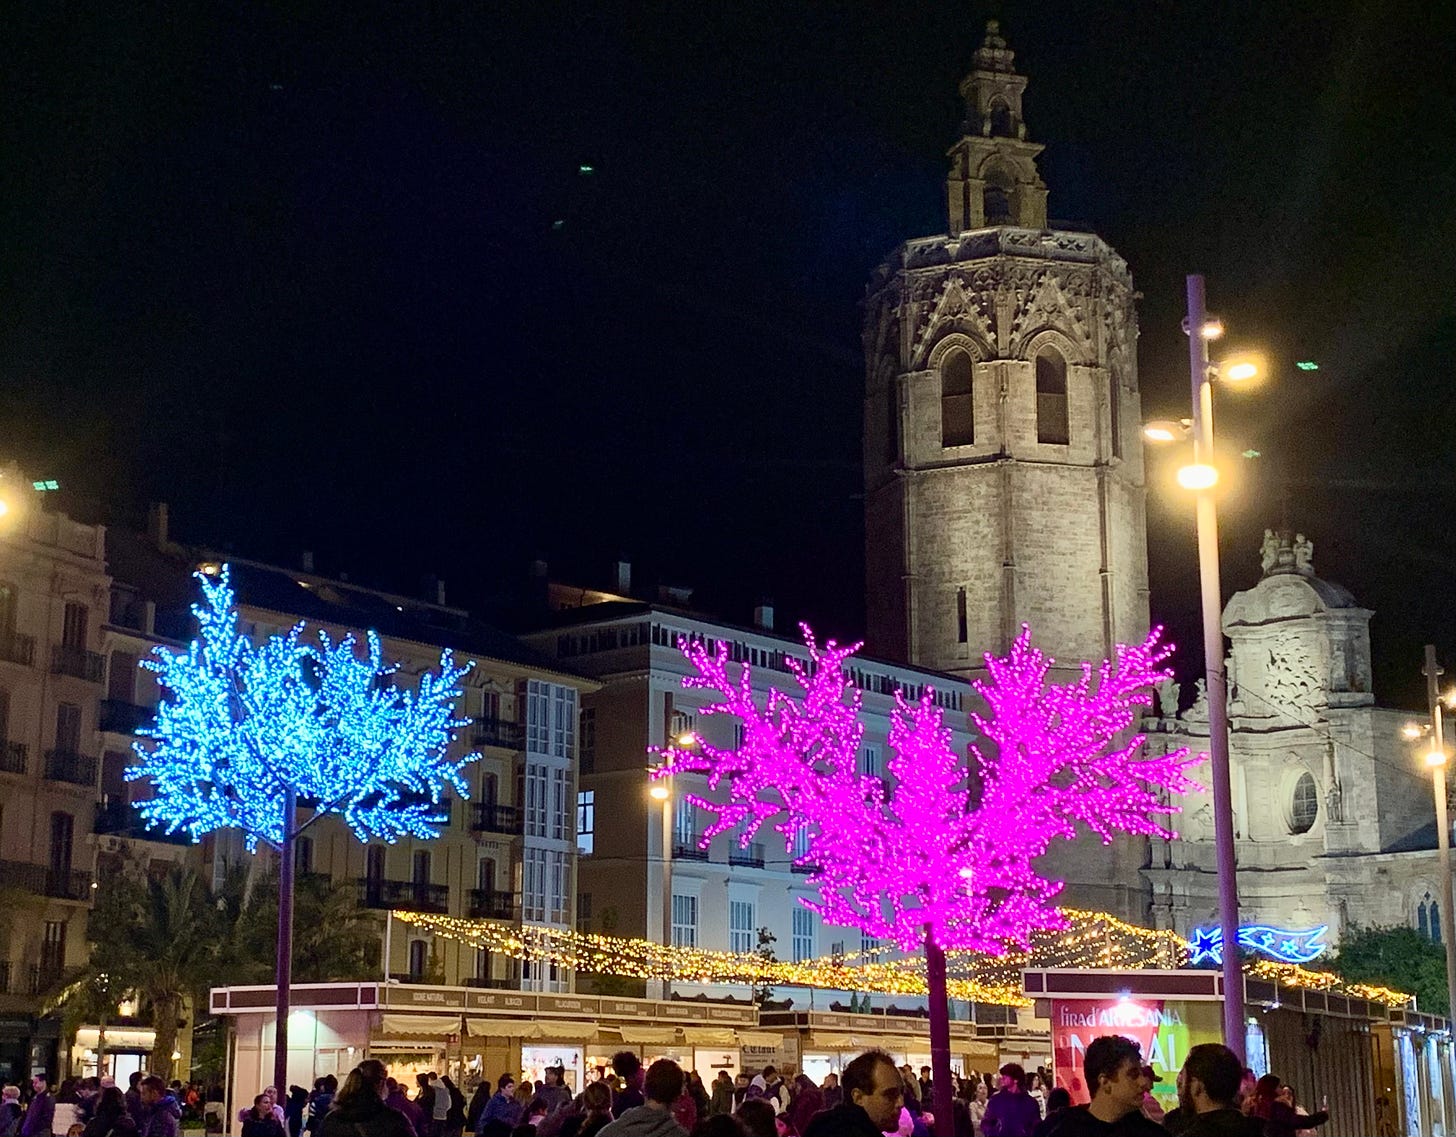 The Cathedral sits behind a small pop up market and festive lights, including trees whose leaves are all lights in white or pink.